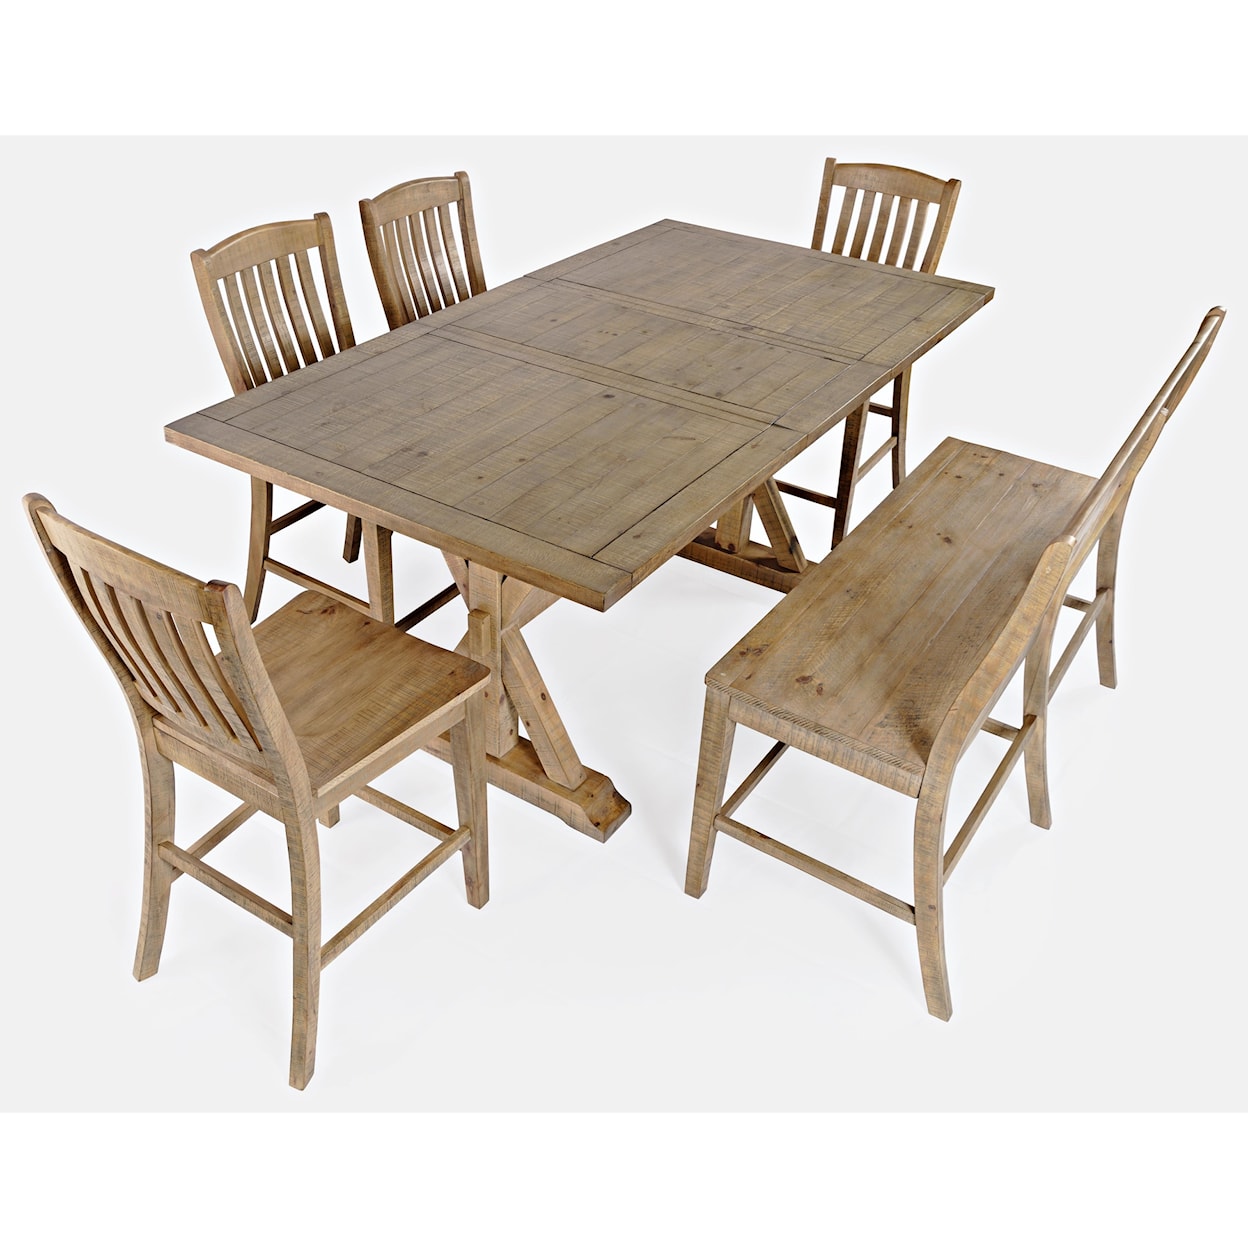 Jofran Carlyle Crossing 6-Piece Counter Table and Chair Set